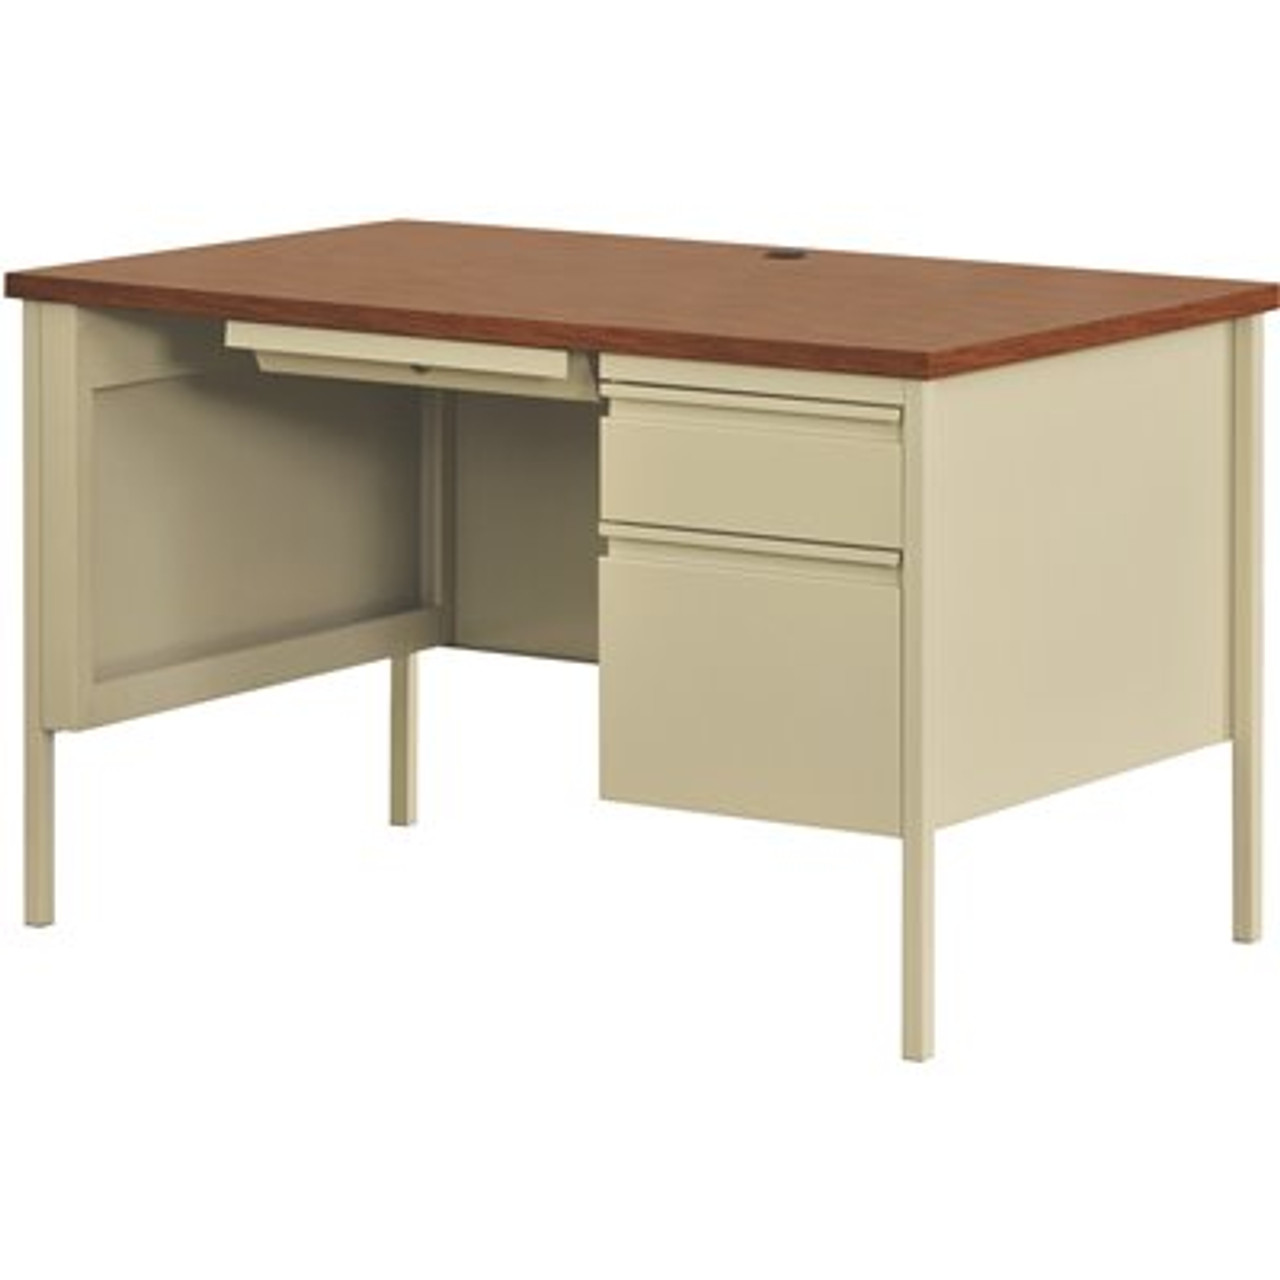 Hirsh Commercial 48 In. W X 30 In. D Rectangular Shape Putty/Oak 3-Drawer Executive Desk With Right-Hand Single Pedestal File